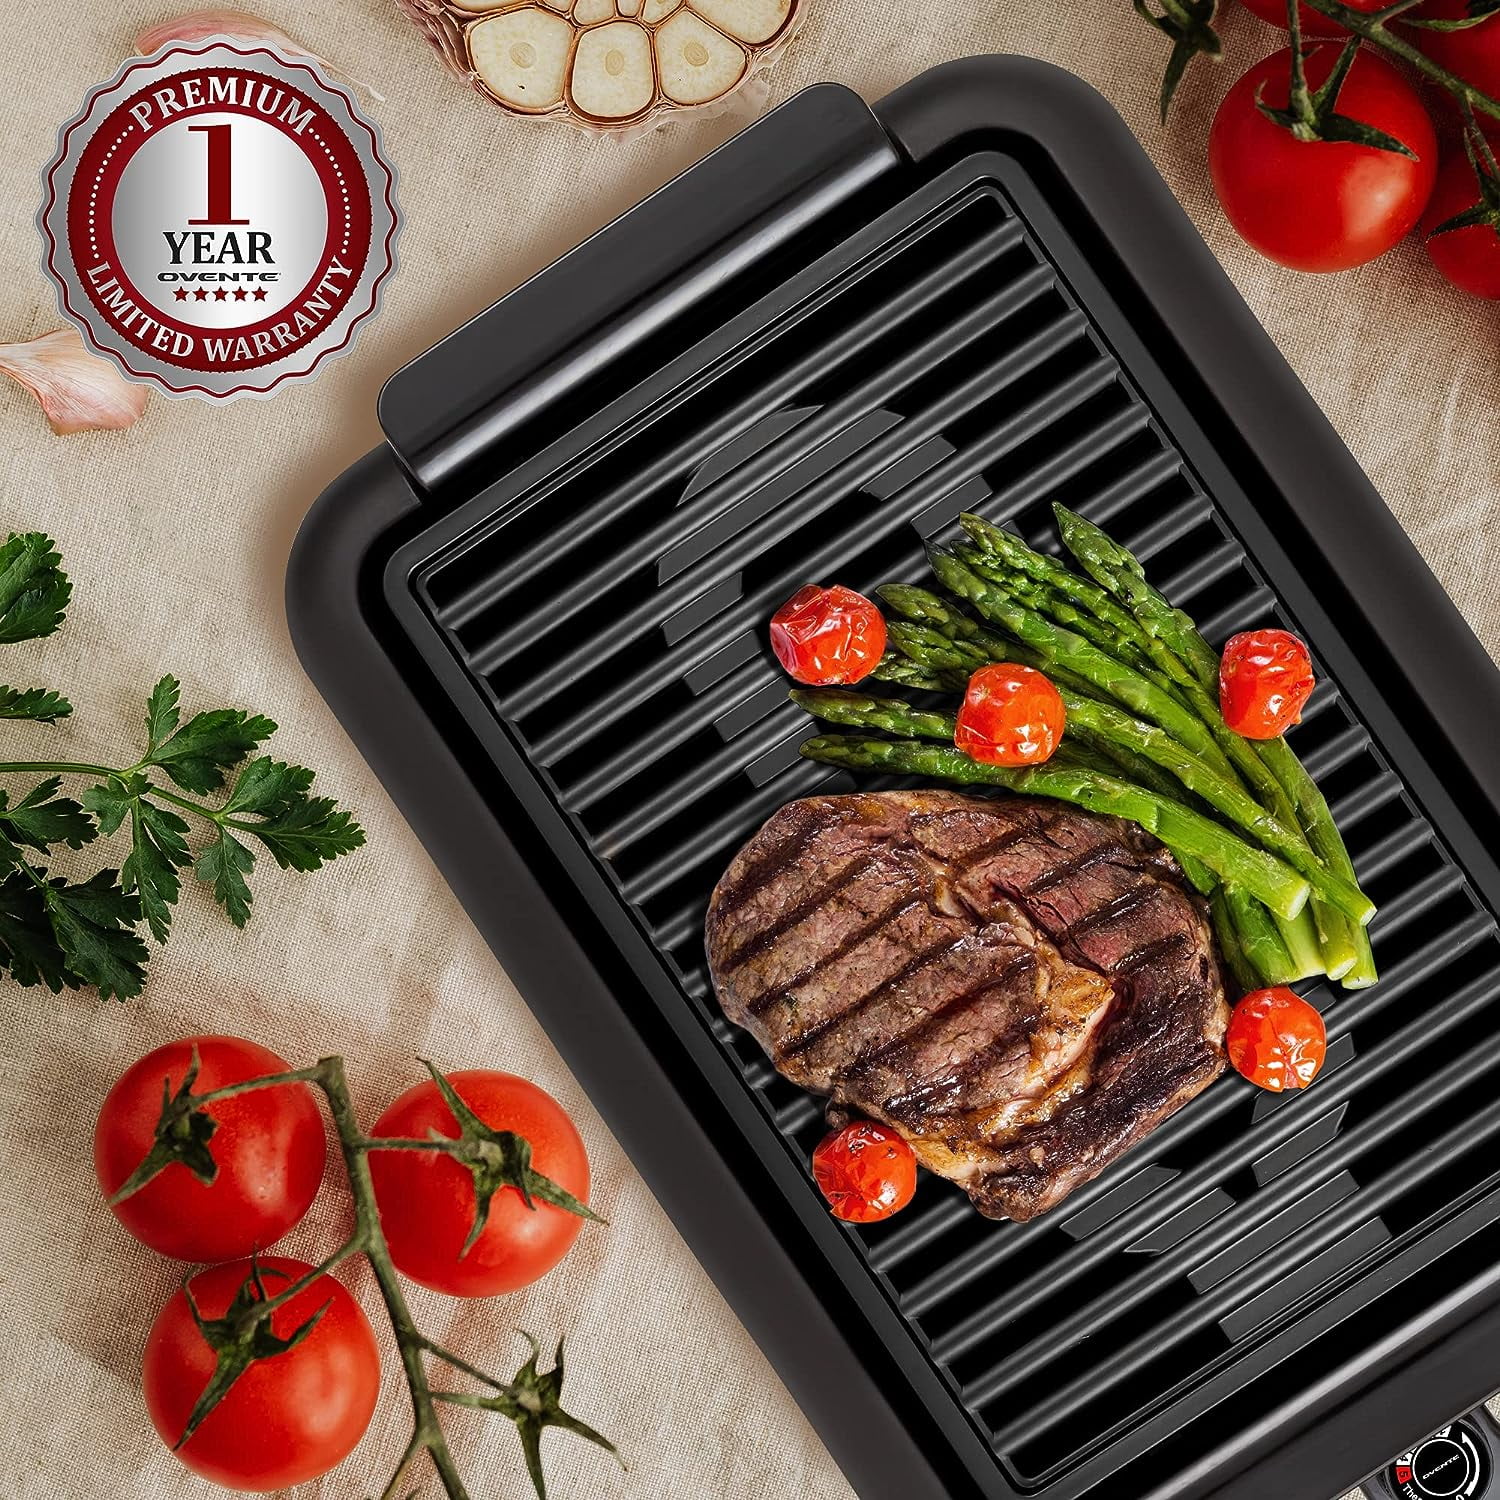 Ovente Electric Indoor Grill with 15 x 10-inch Non-Stick Cooking Plate,  Dishwasher-Safe Base and Removable Drip Tray, Adjustable Temperature Knob